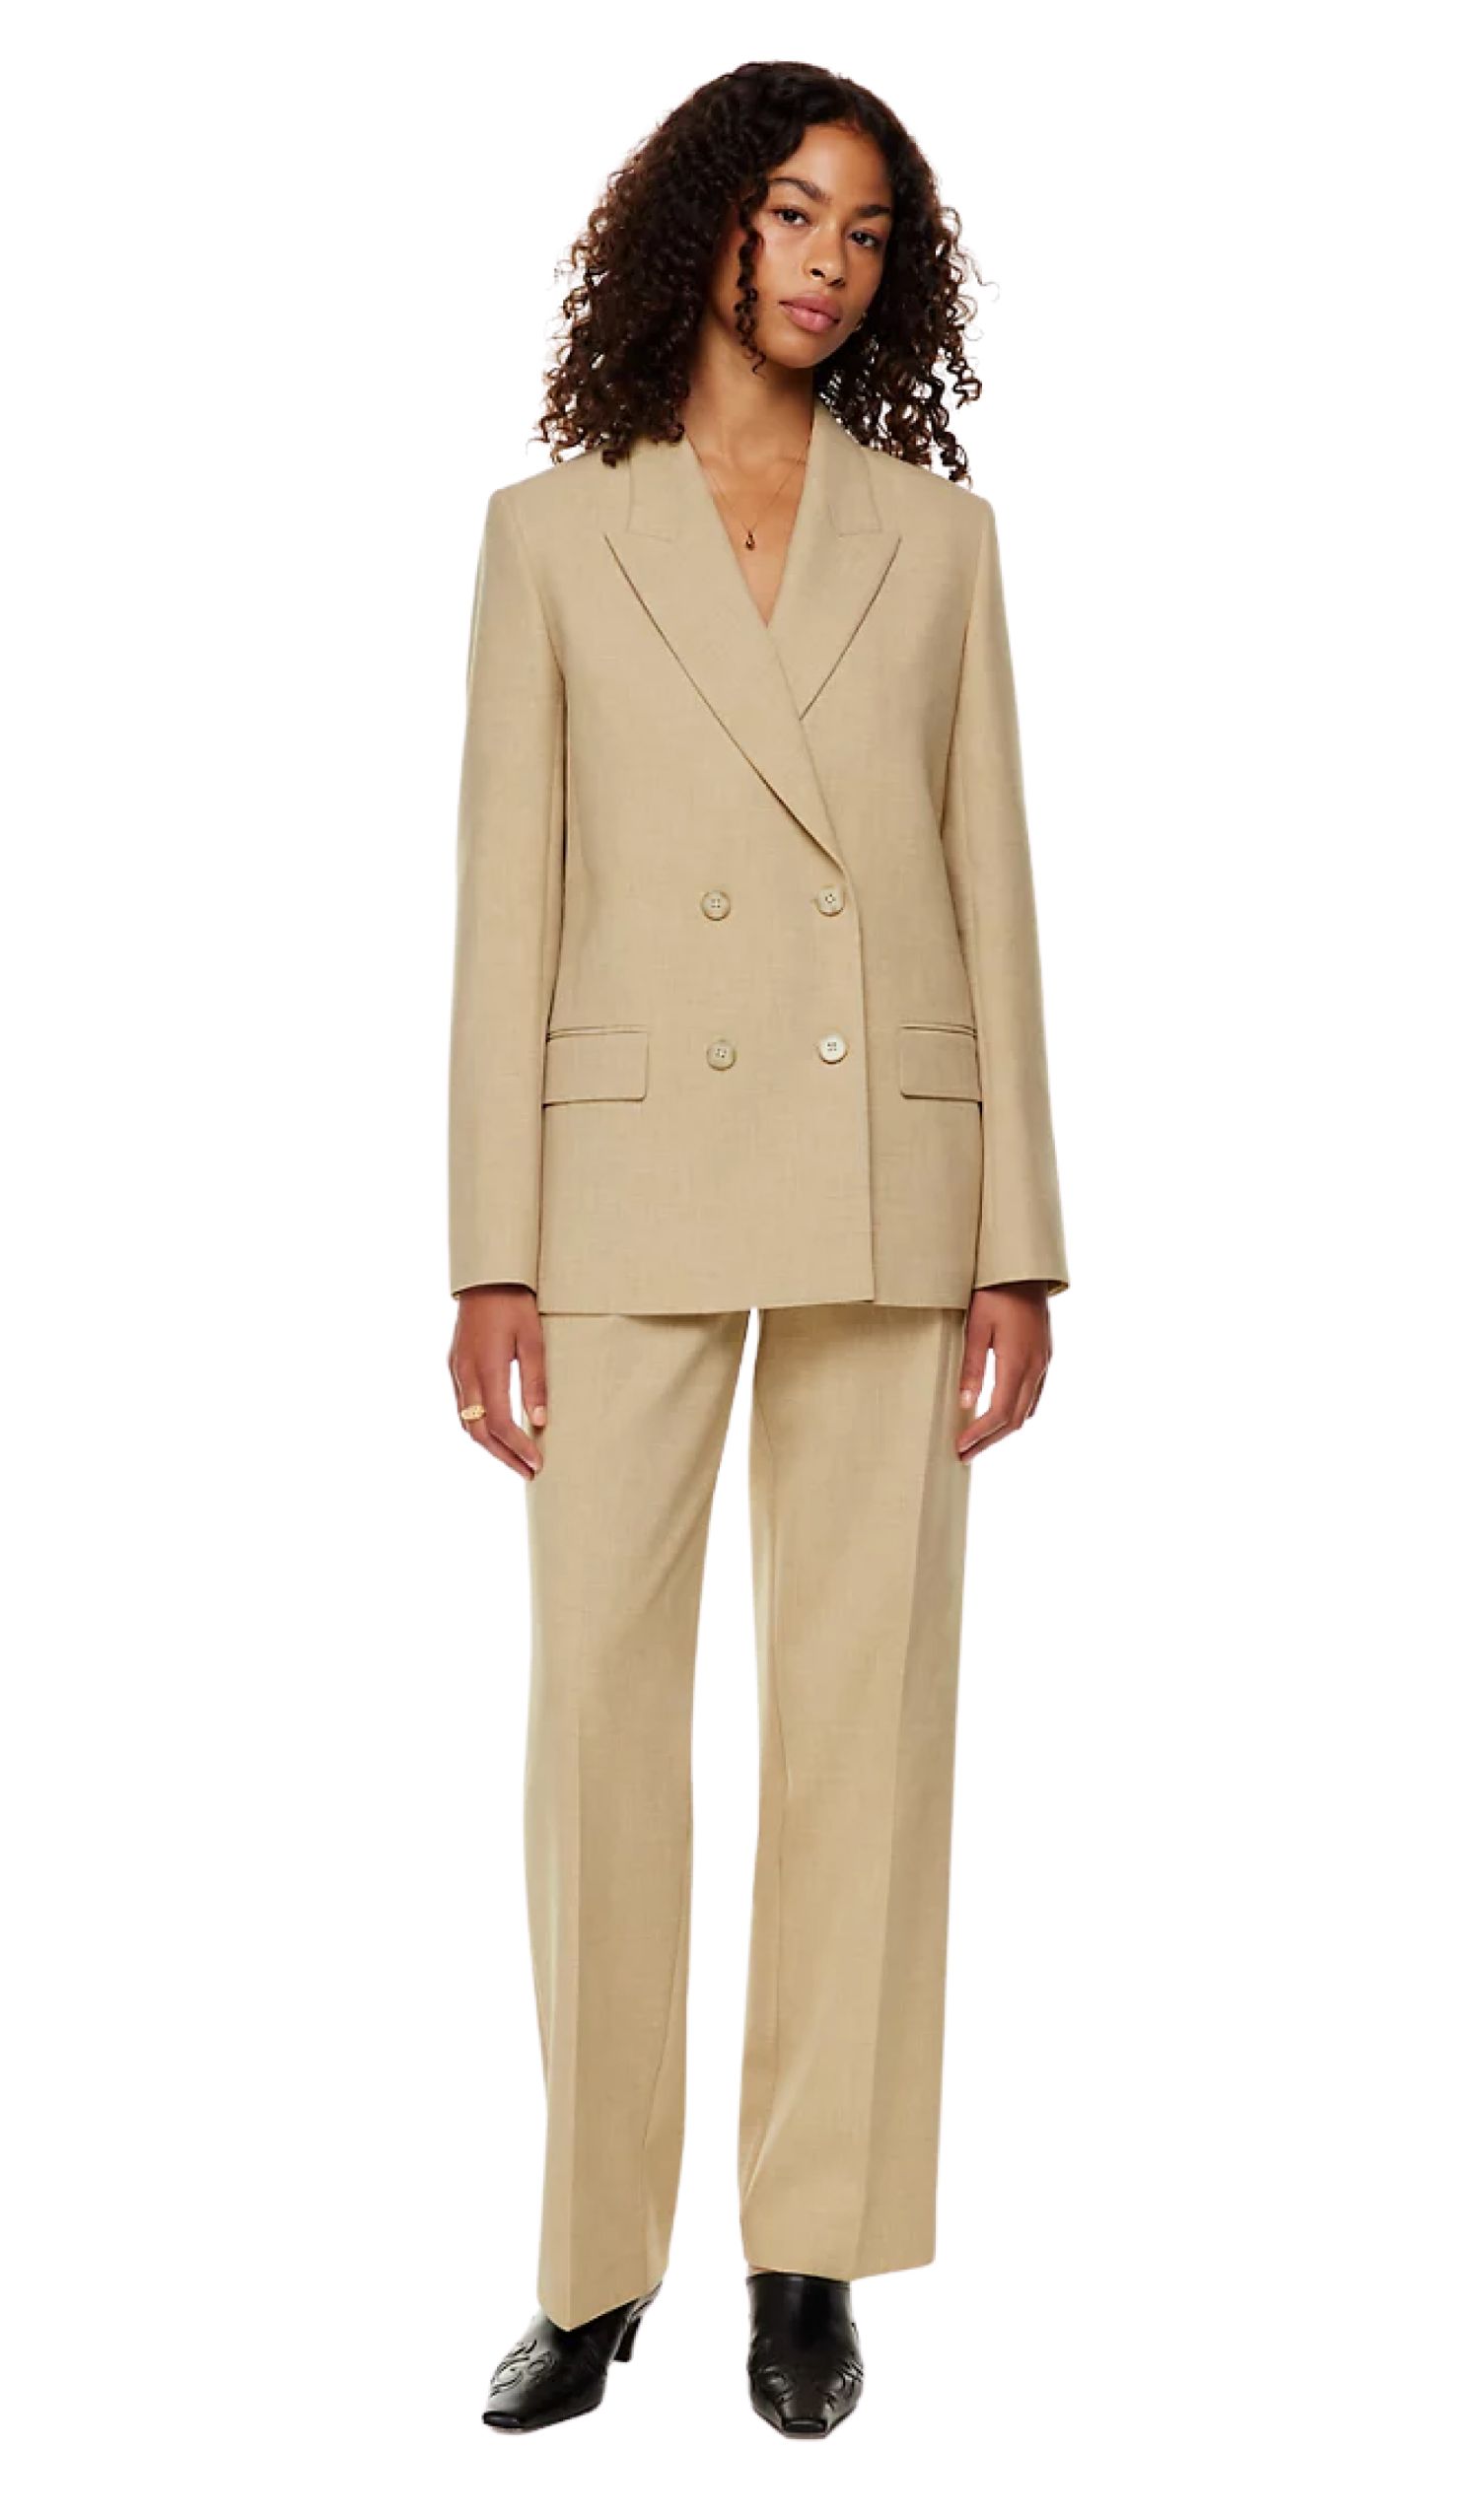 Wilfred Fall - suiting Outfit B